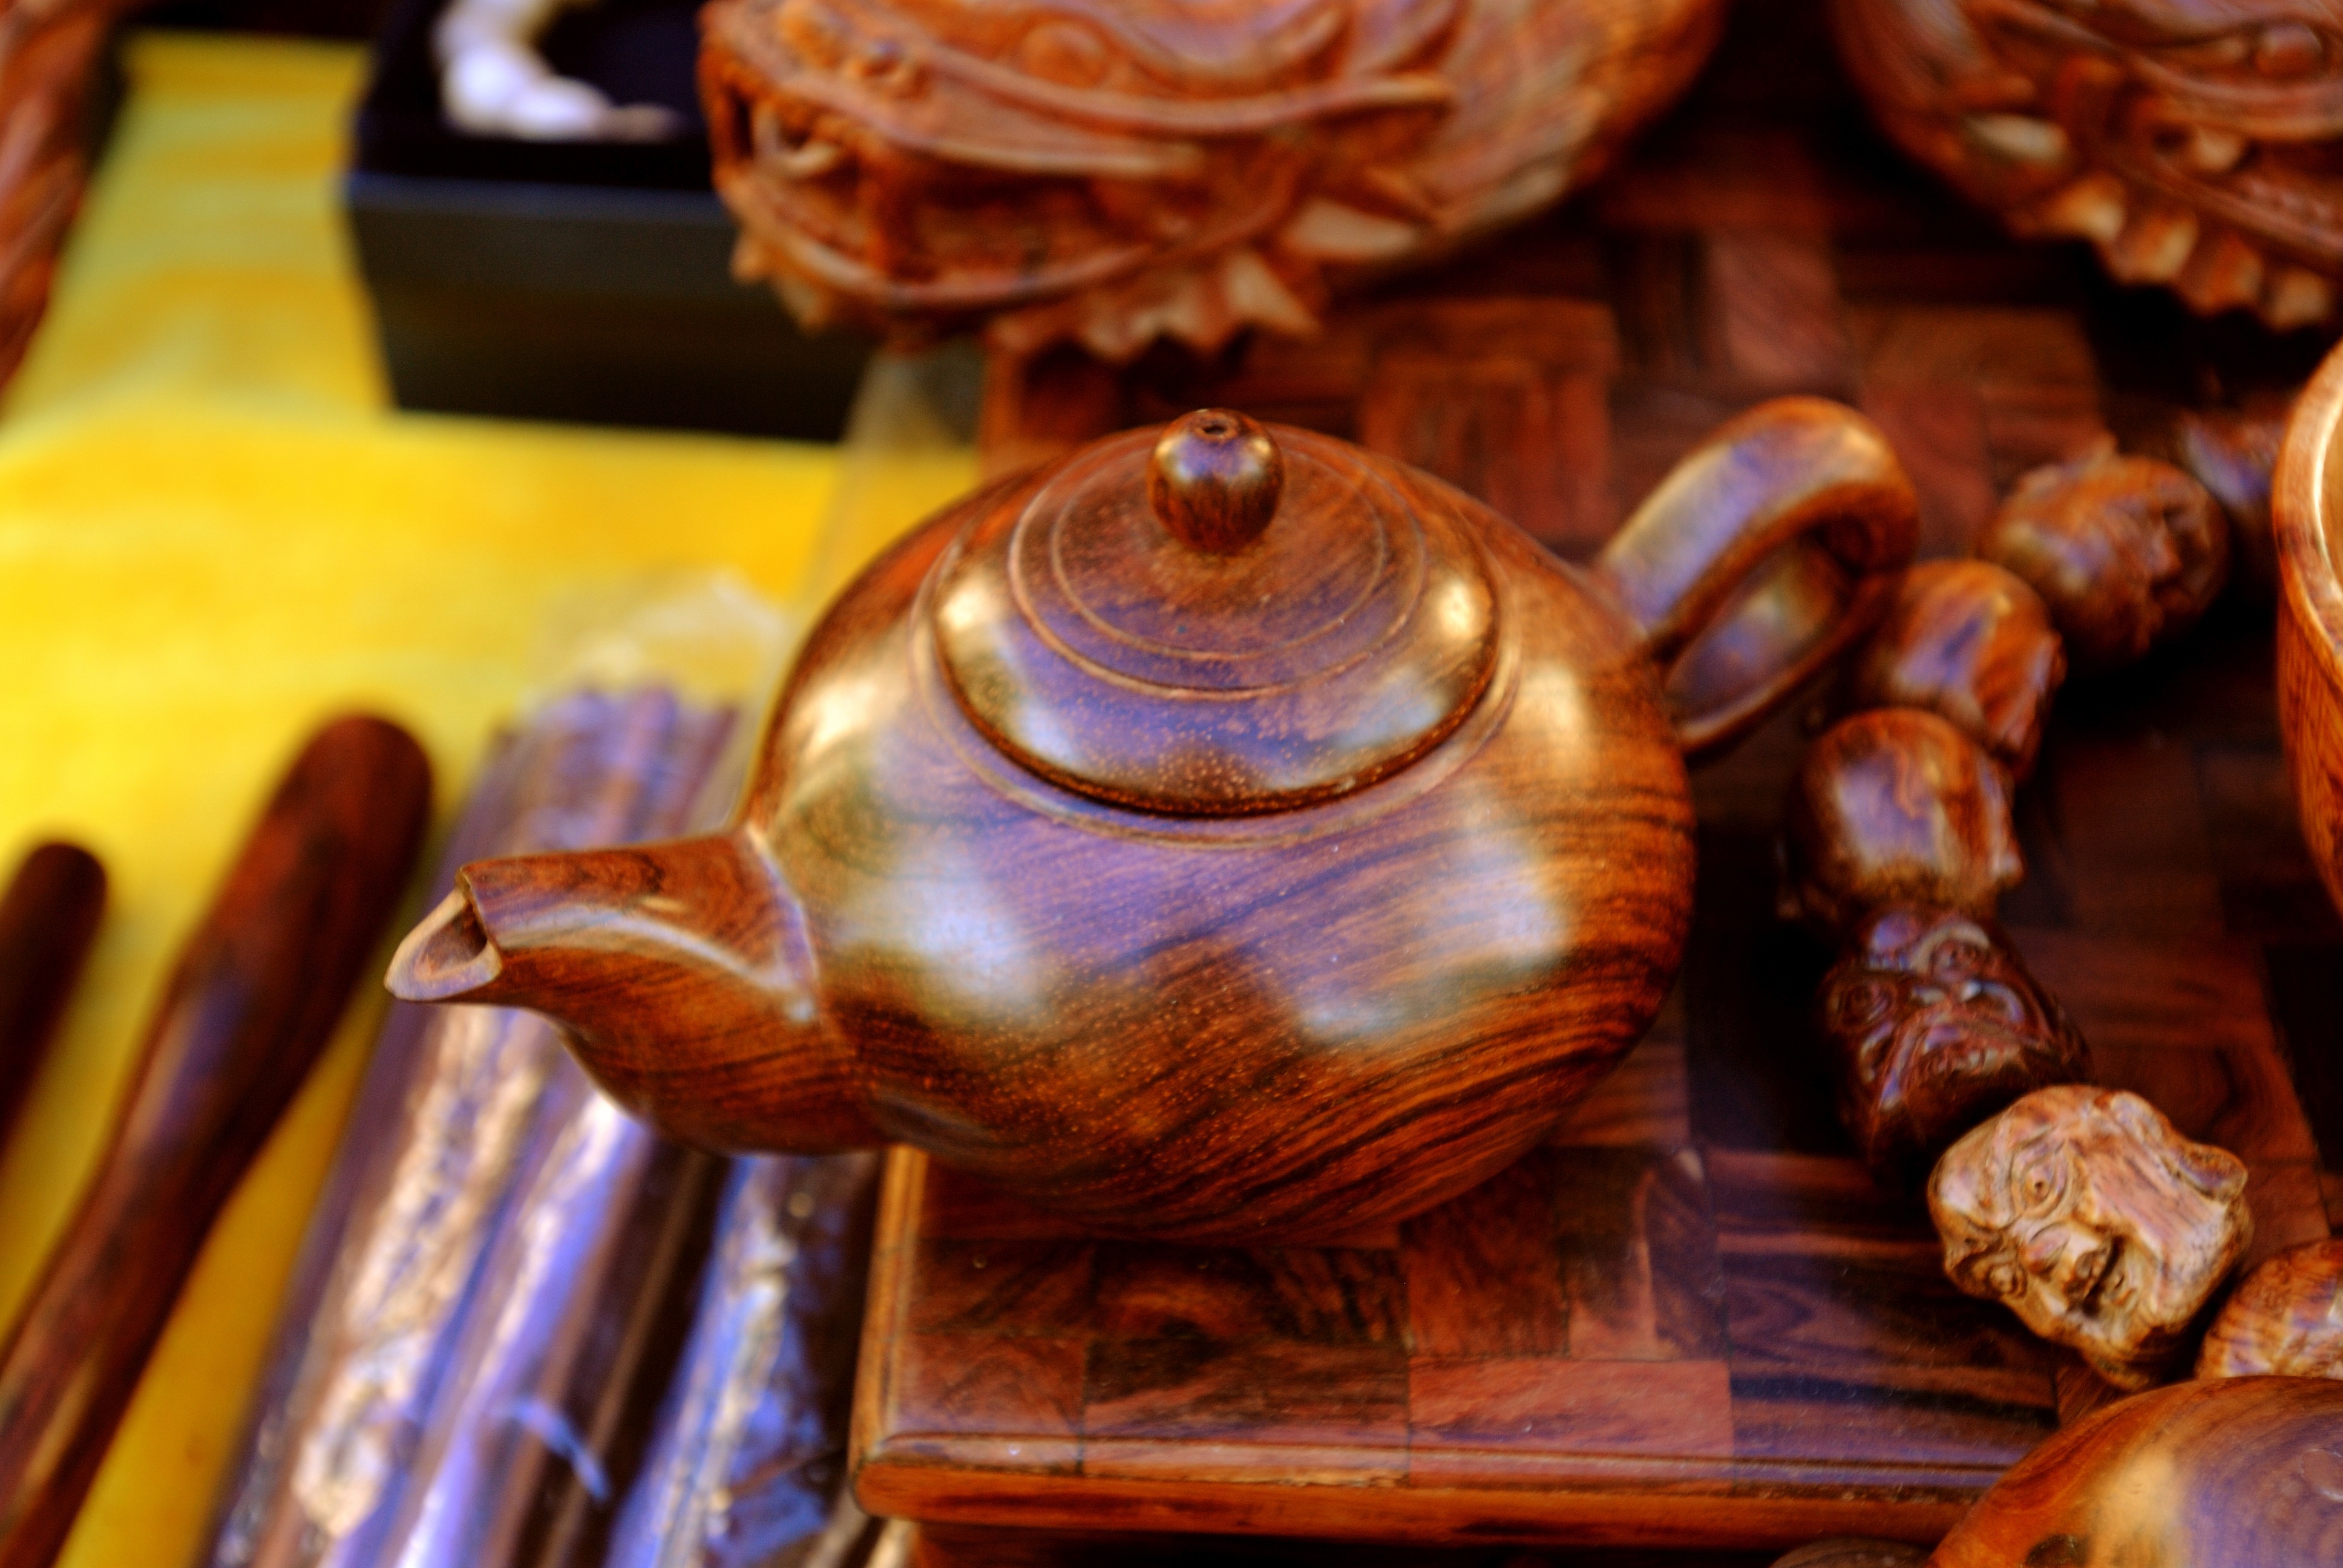 Huanghuali hardwood items such as this teapot can be found in Haikou’s stores.